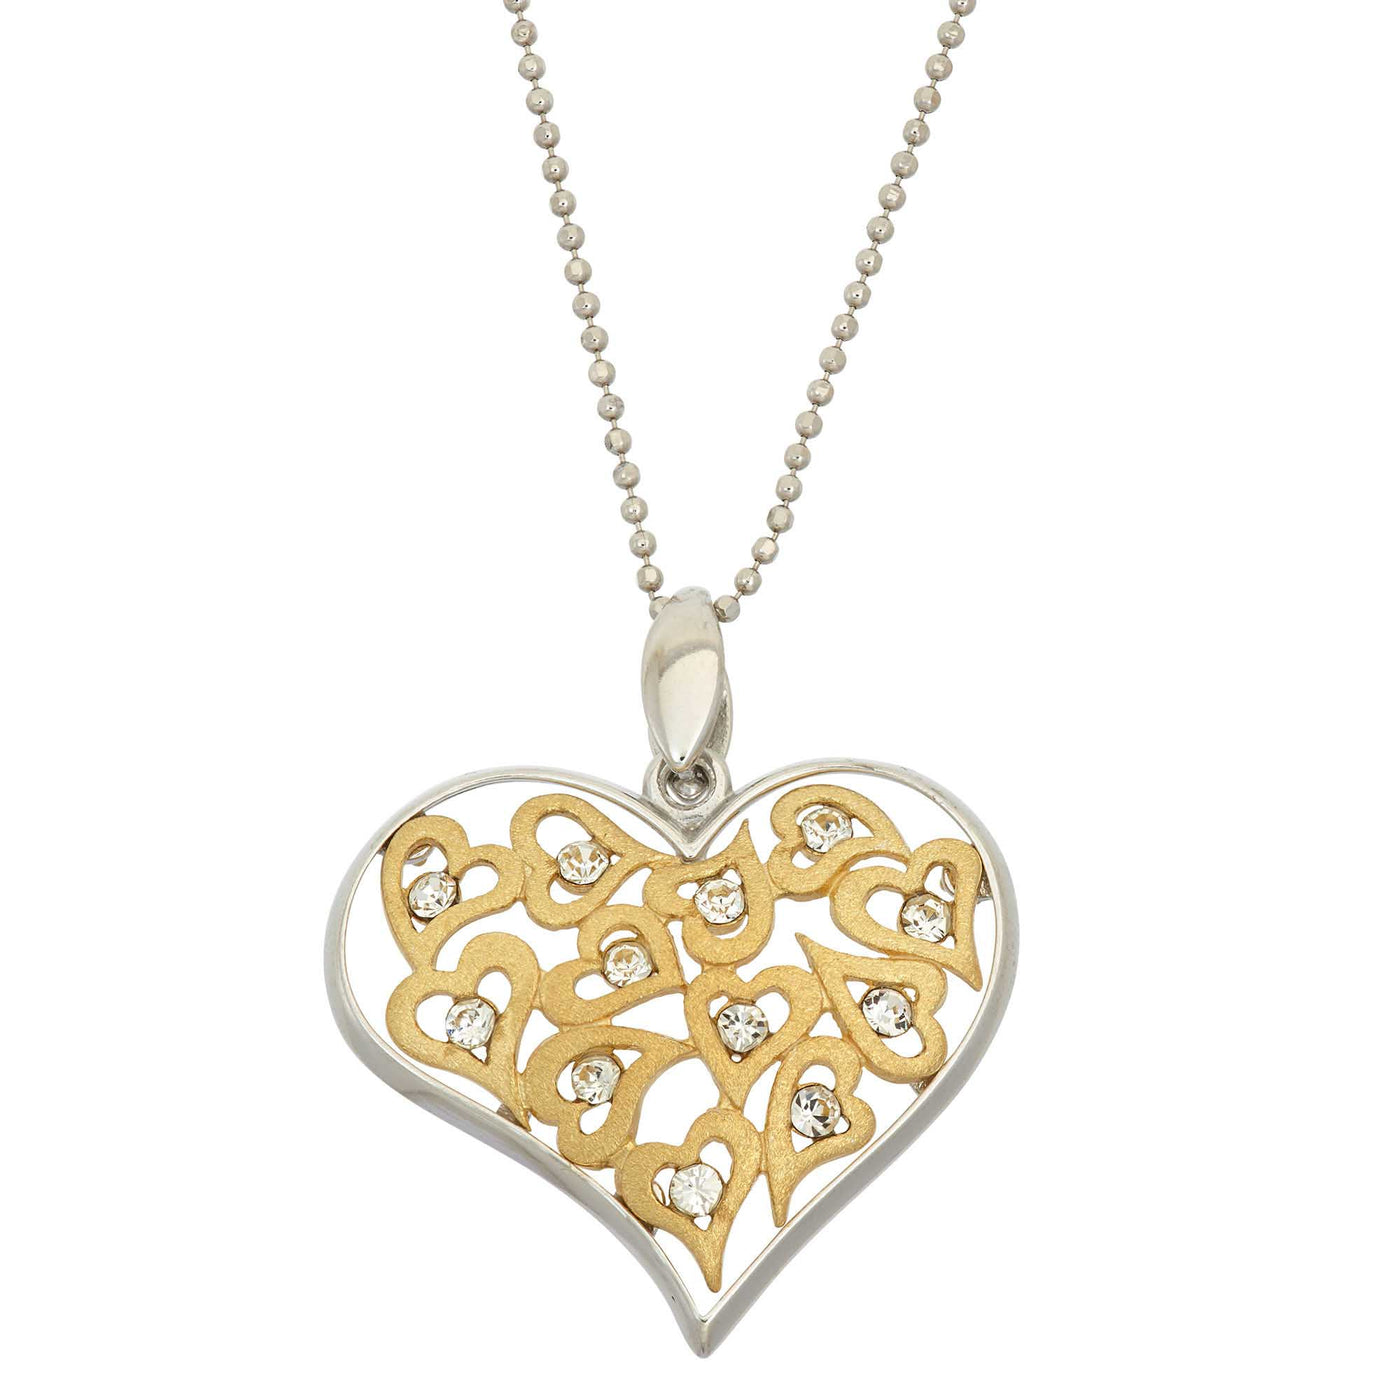 Rebecca Sloane Gold Plate Silver Heart Pendant With White Crystal